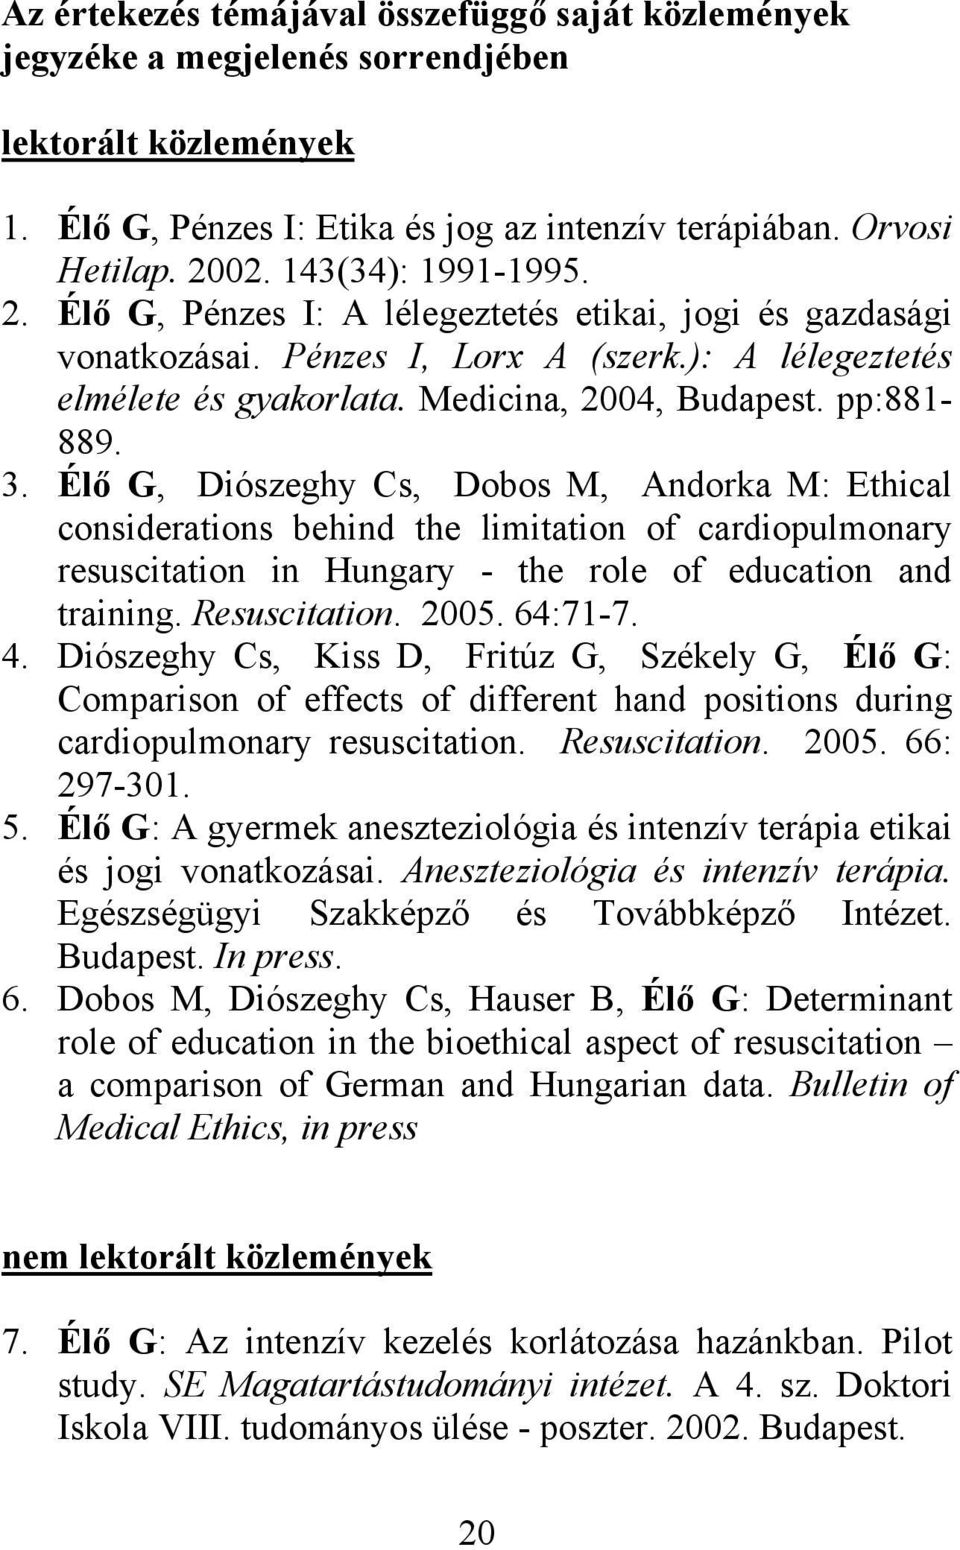 3. Élő G, Diószeghy Cs, Dobos M, Andorka M: Ethical considerations behind the limitation of cardiopulmonary resuscitation in Hungary - the role of education and training. Resuscitation. 2005. 64:71-7.